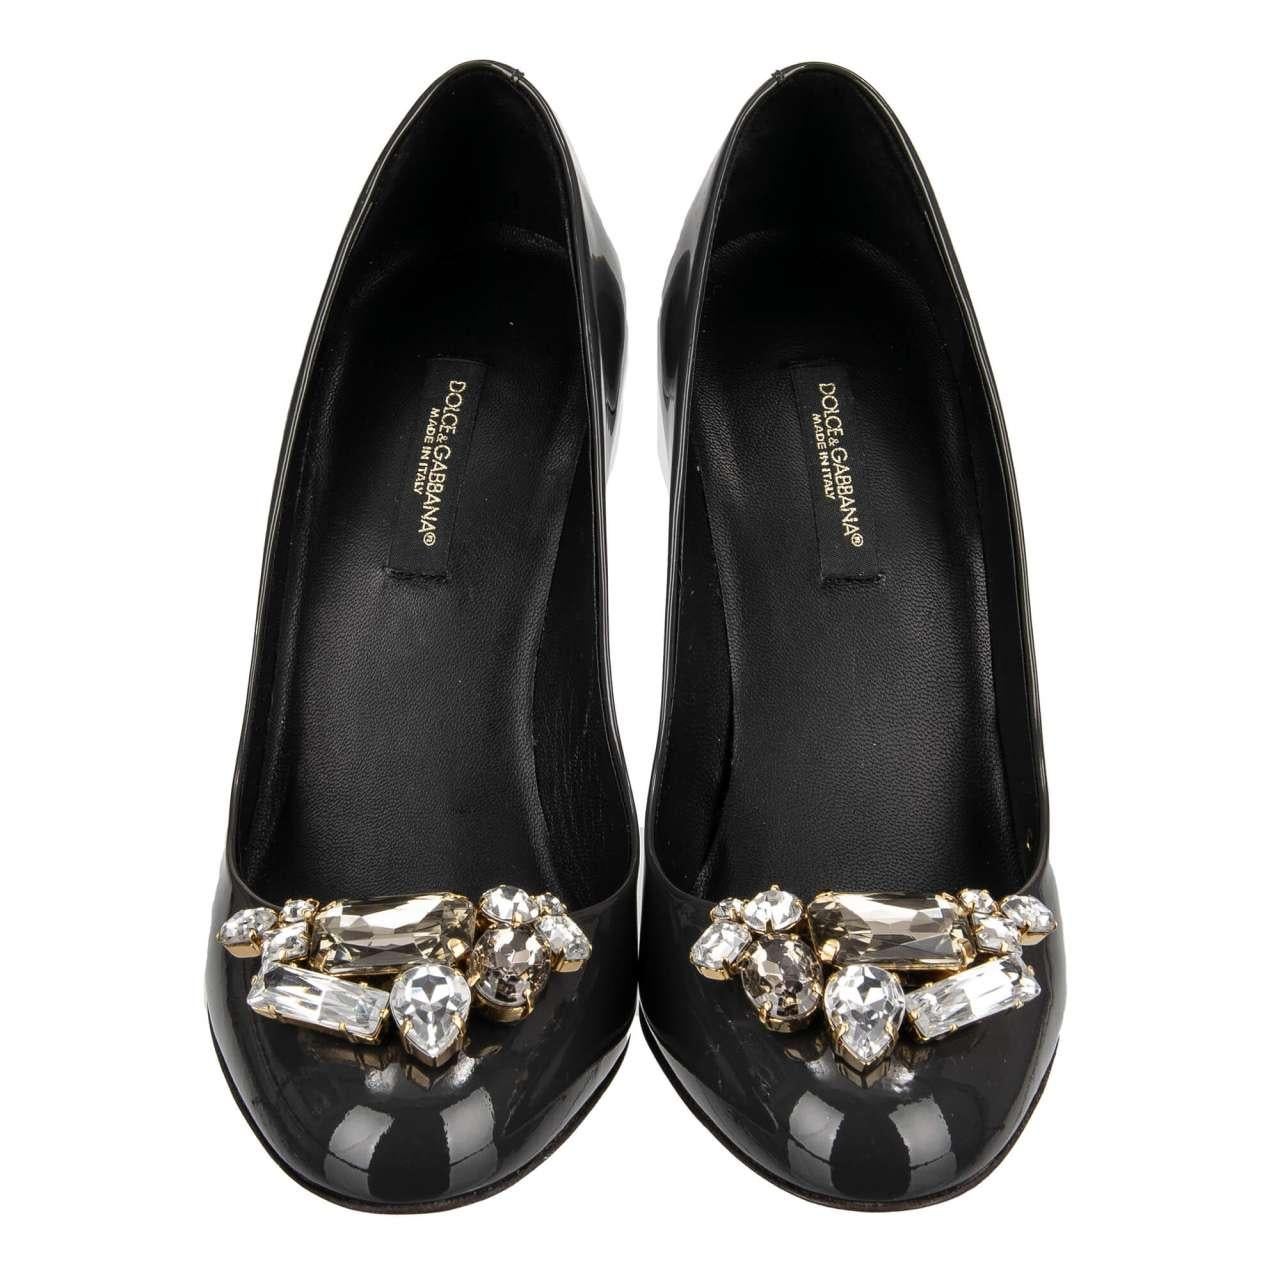 Dolce & Gabbana - Patent Leather Heels Pumps VALLY Crystal Brooch Grey 35 5 In Excellent Condition For Sale In Erkrath, DE